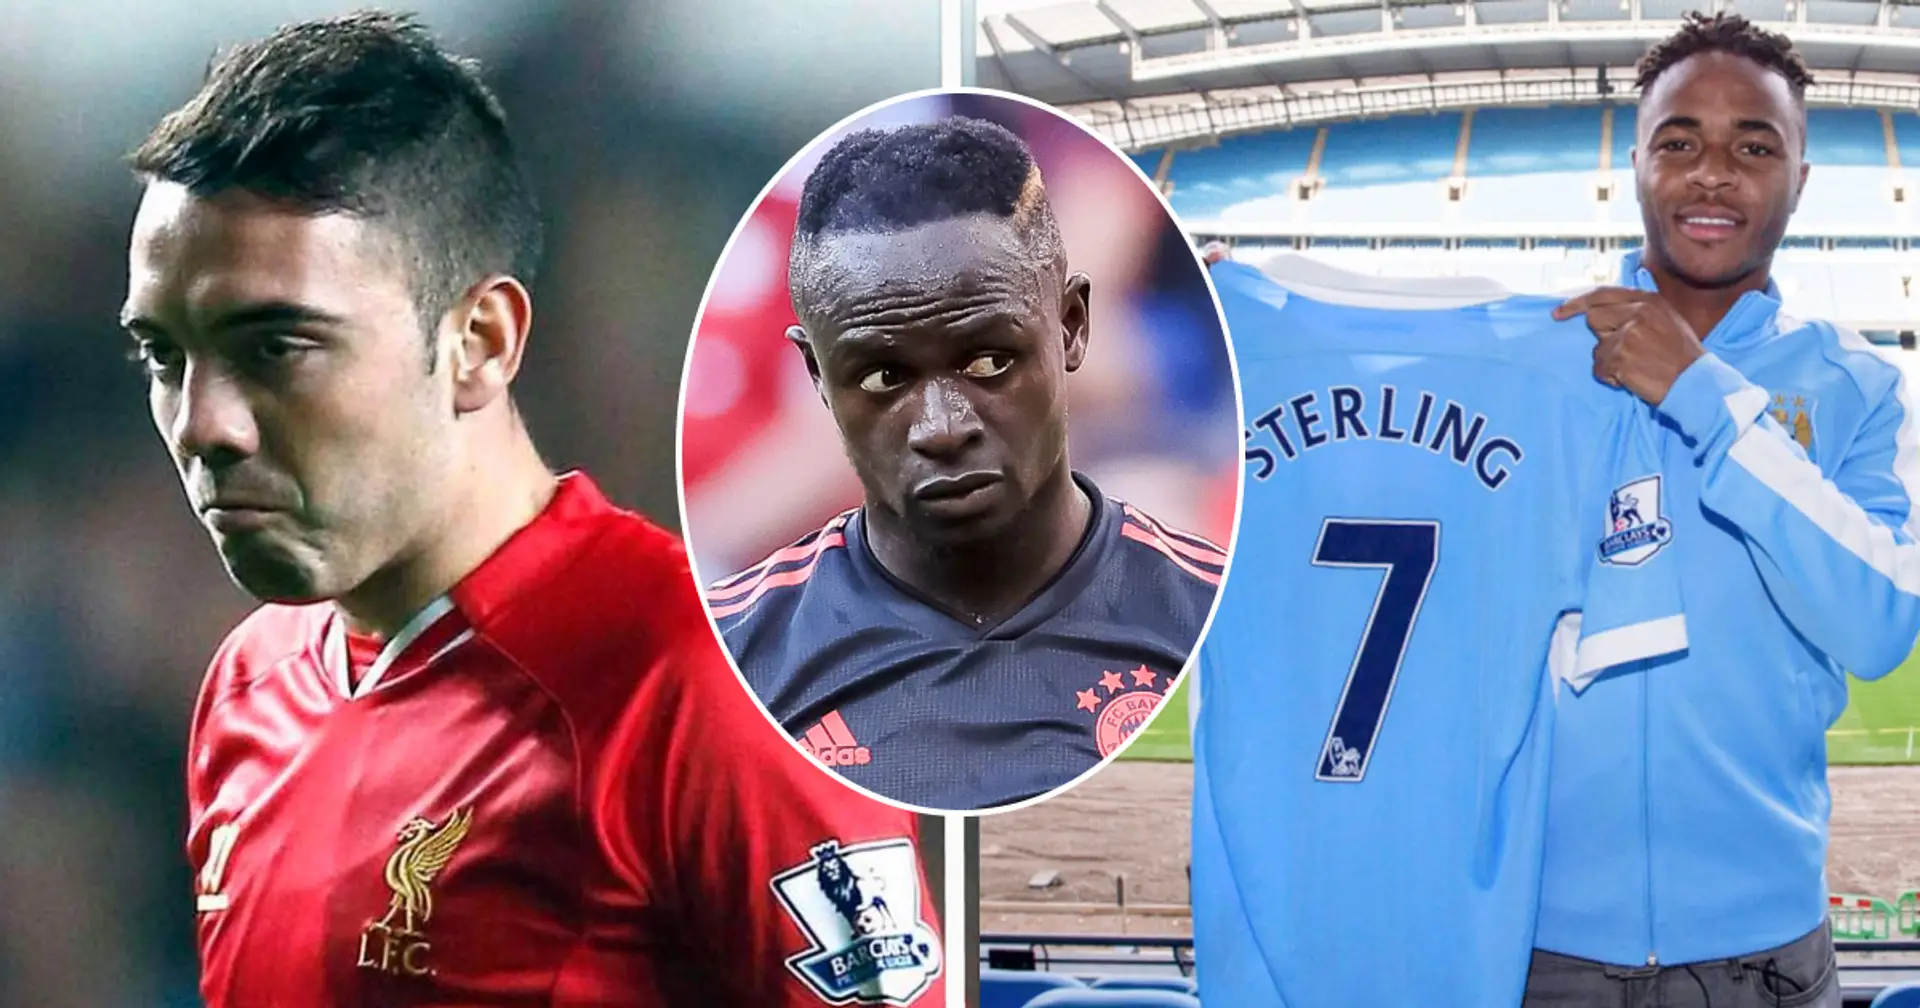 Fans name 4 players who instantly improved after leaving Liverpool following Mane's criticism 